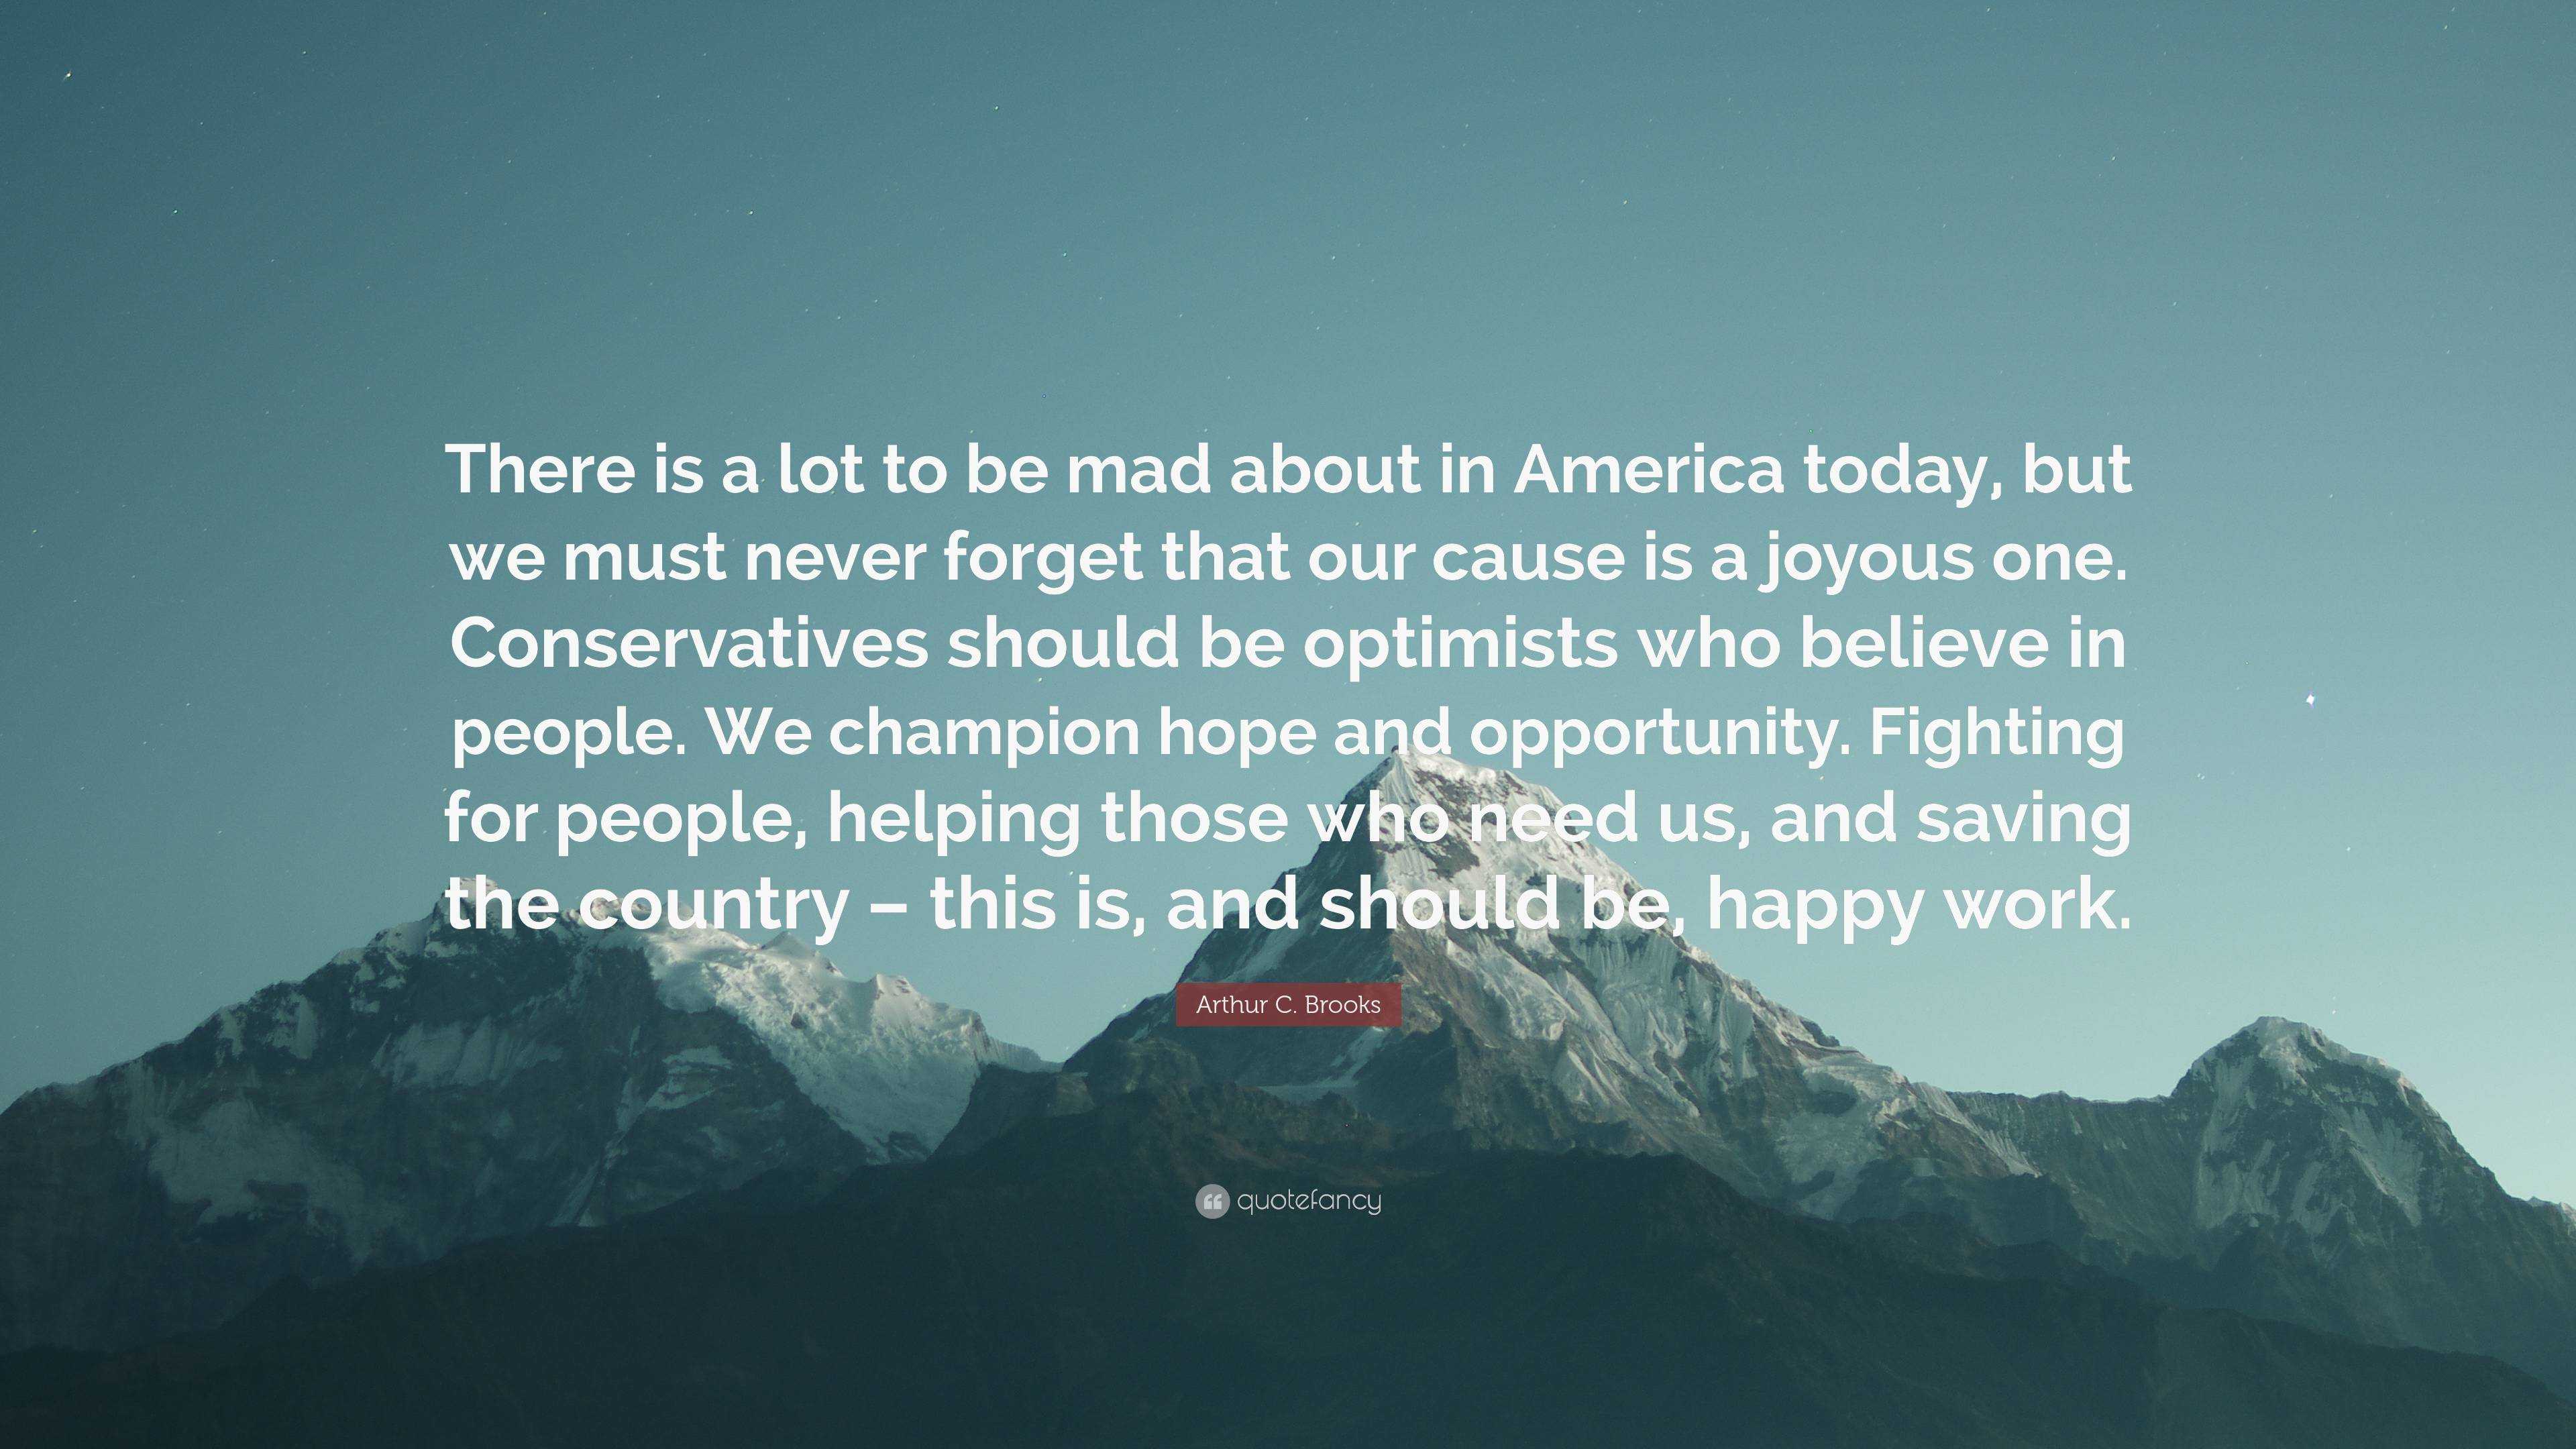 Arthur C. Brooks Quote: “There is a to be mad about in America today, but must never forget that our cause is a joyous one. Conservatives ...”